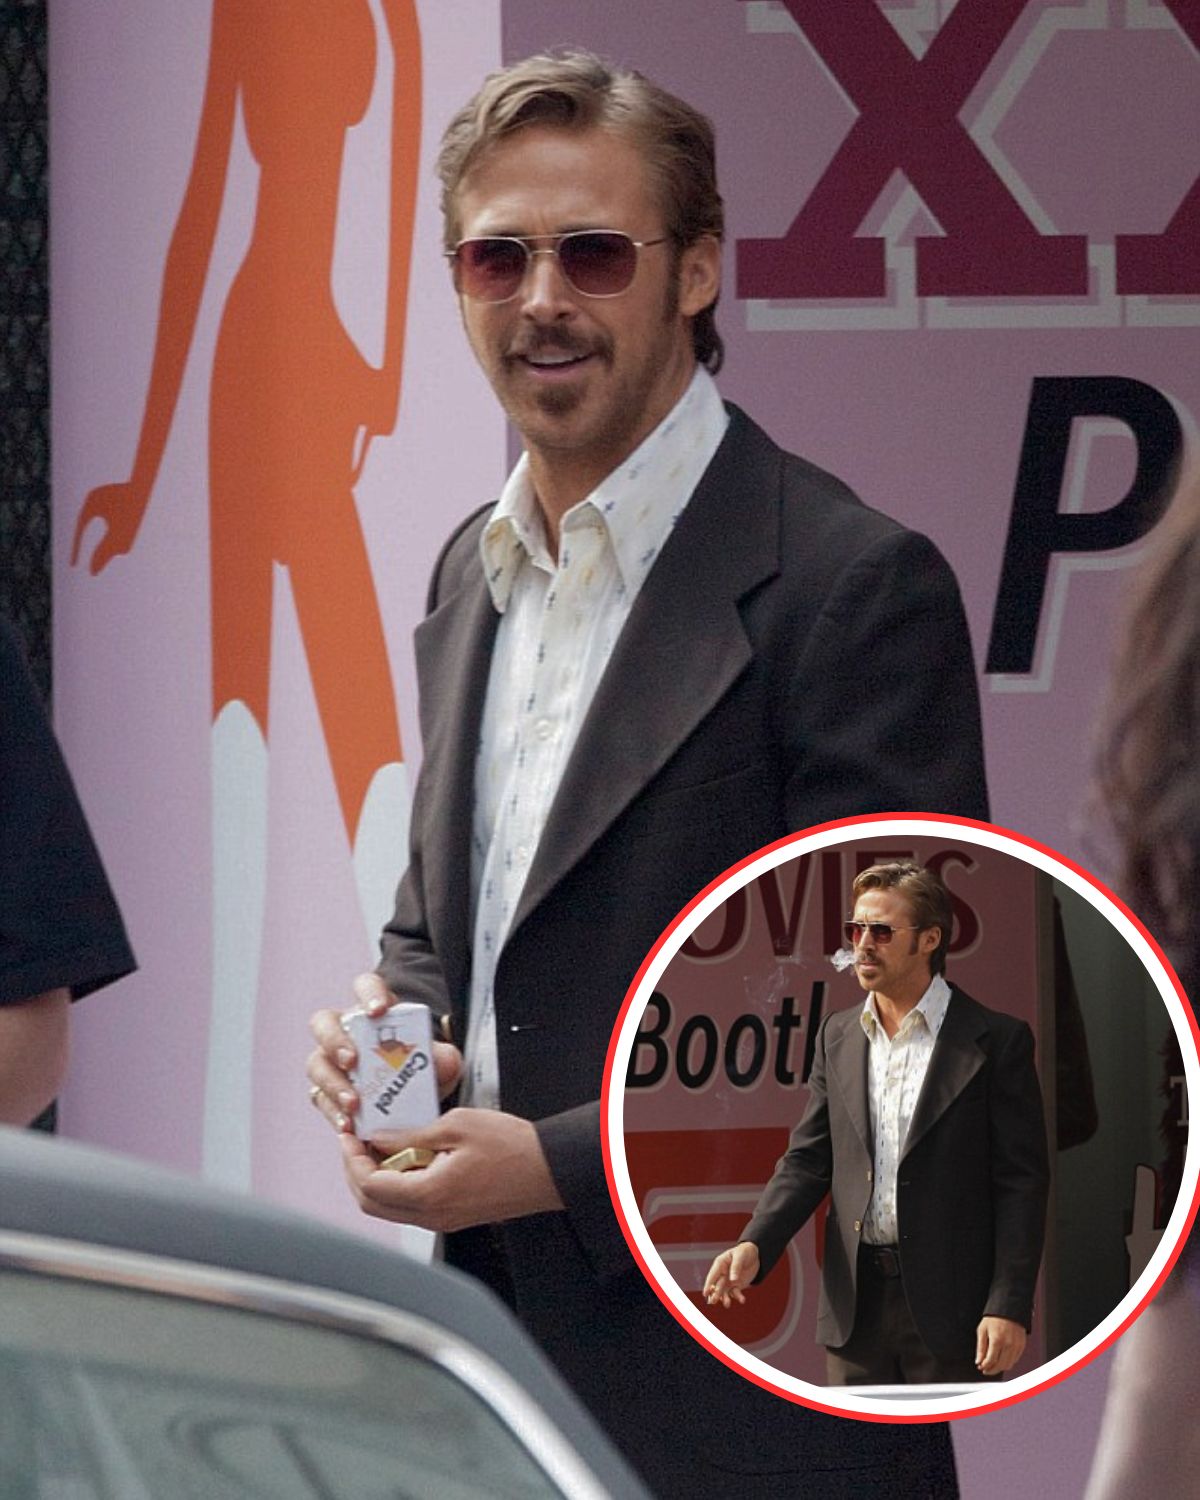 Cover Image for Ryan Gosling shows off his handsome looks in a classic outfit and facial hair